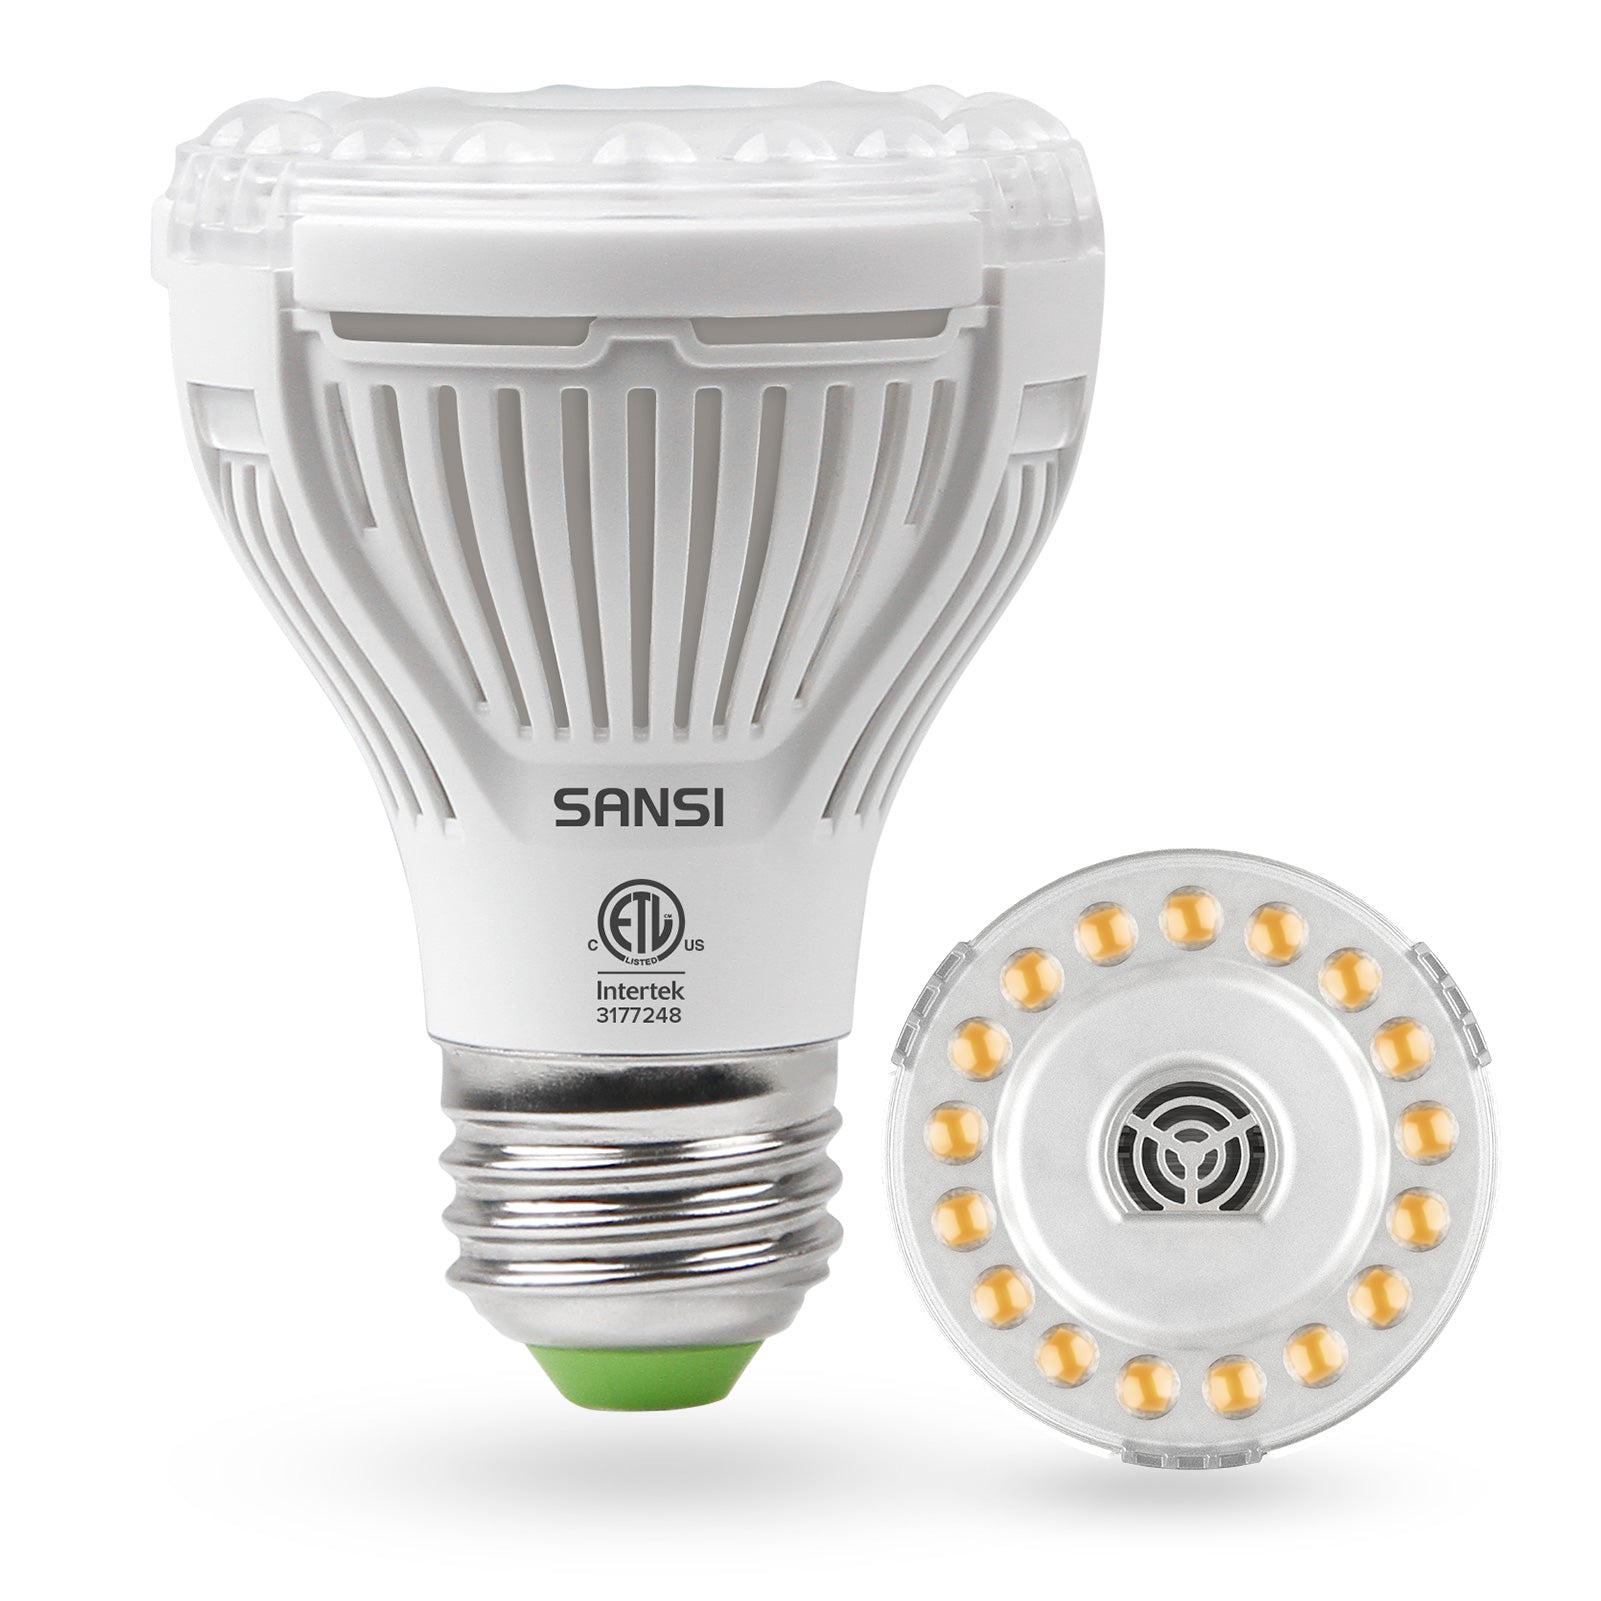 10W LED Grow Light Bulb replicates natural sunlight, suitable for all stages of growth